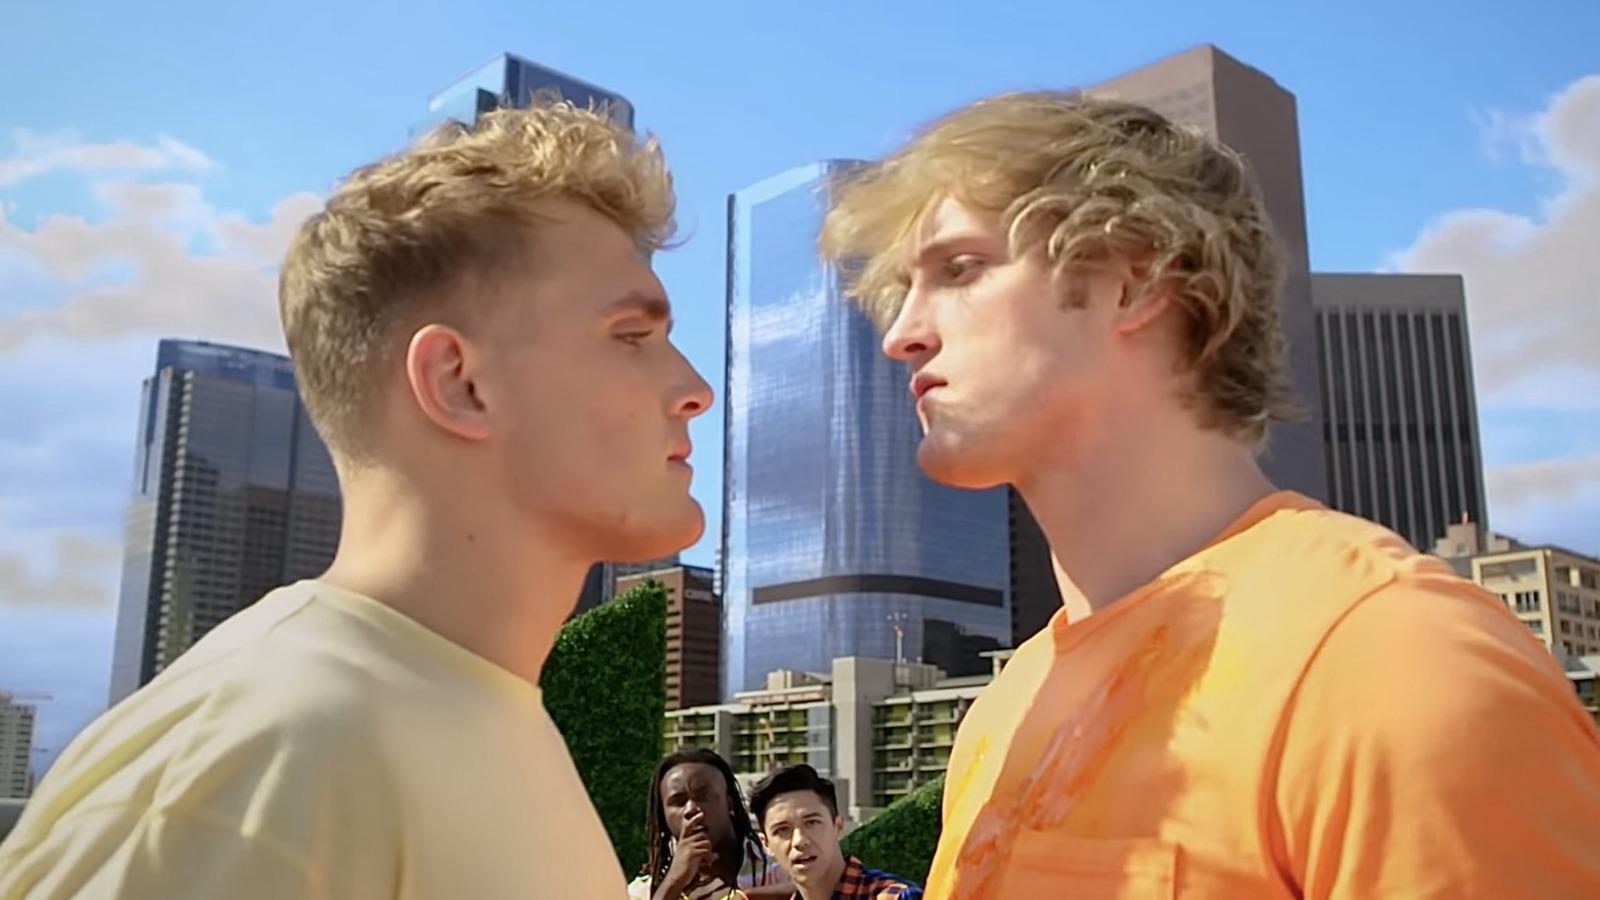 Jake Paul vs Mike Tyson has been postponed, but Logan Paul has thrown his hat in the ring as a replacement